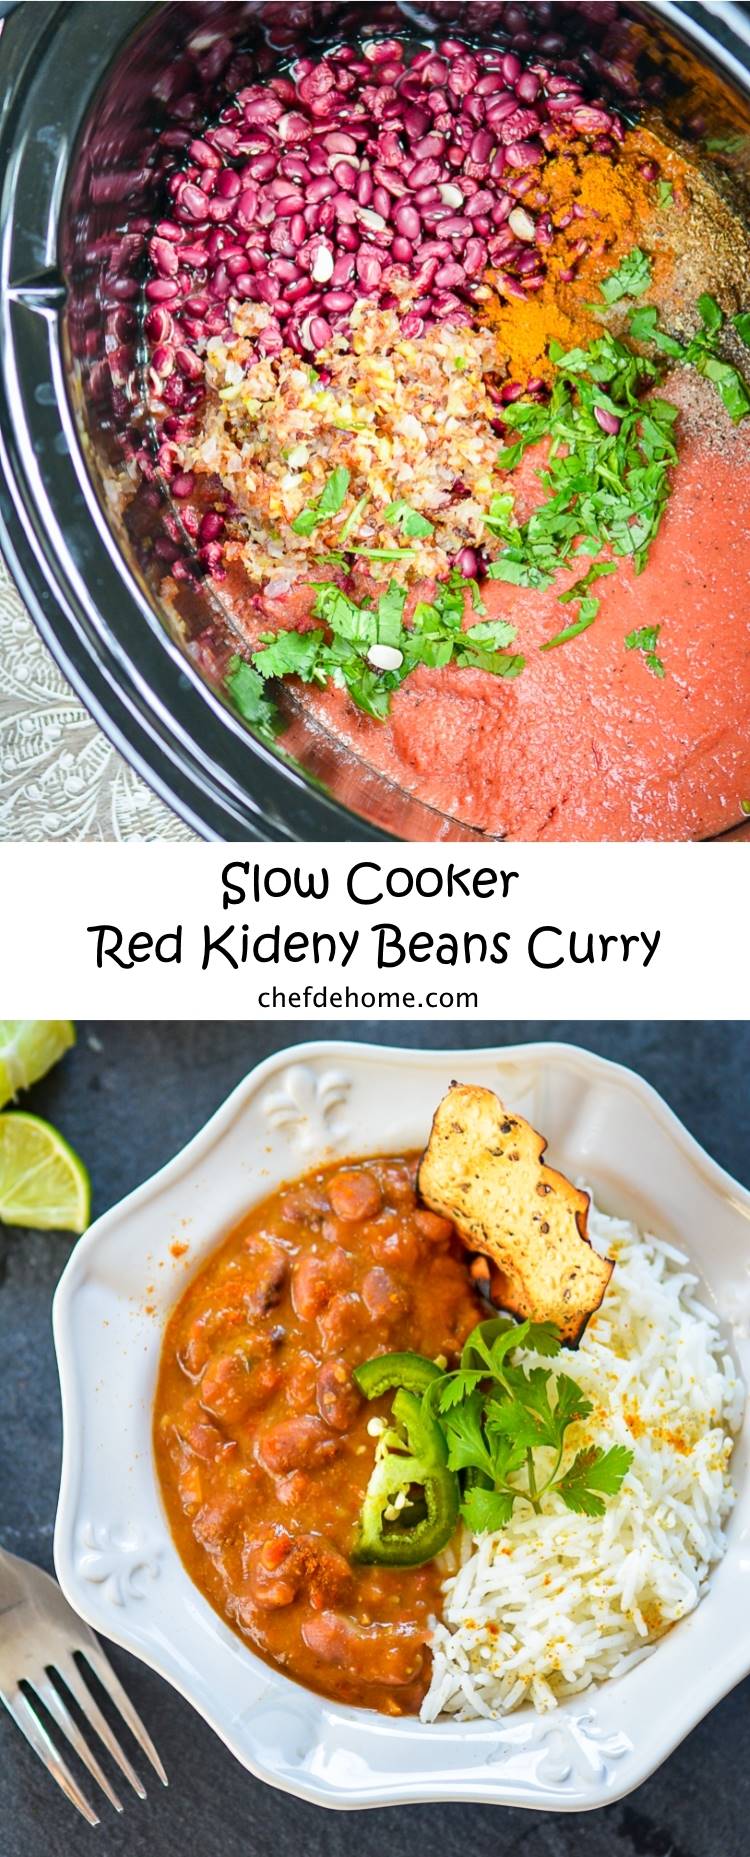 Creamy Kidney Beans Curry in Slow Cooker | chefdehome.com